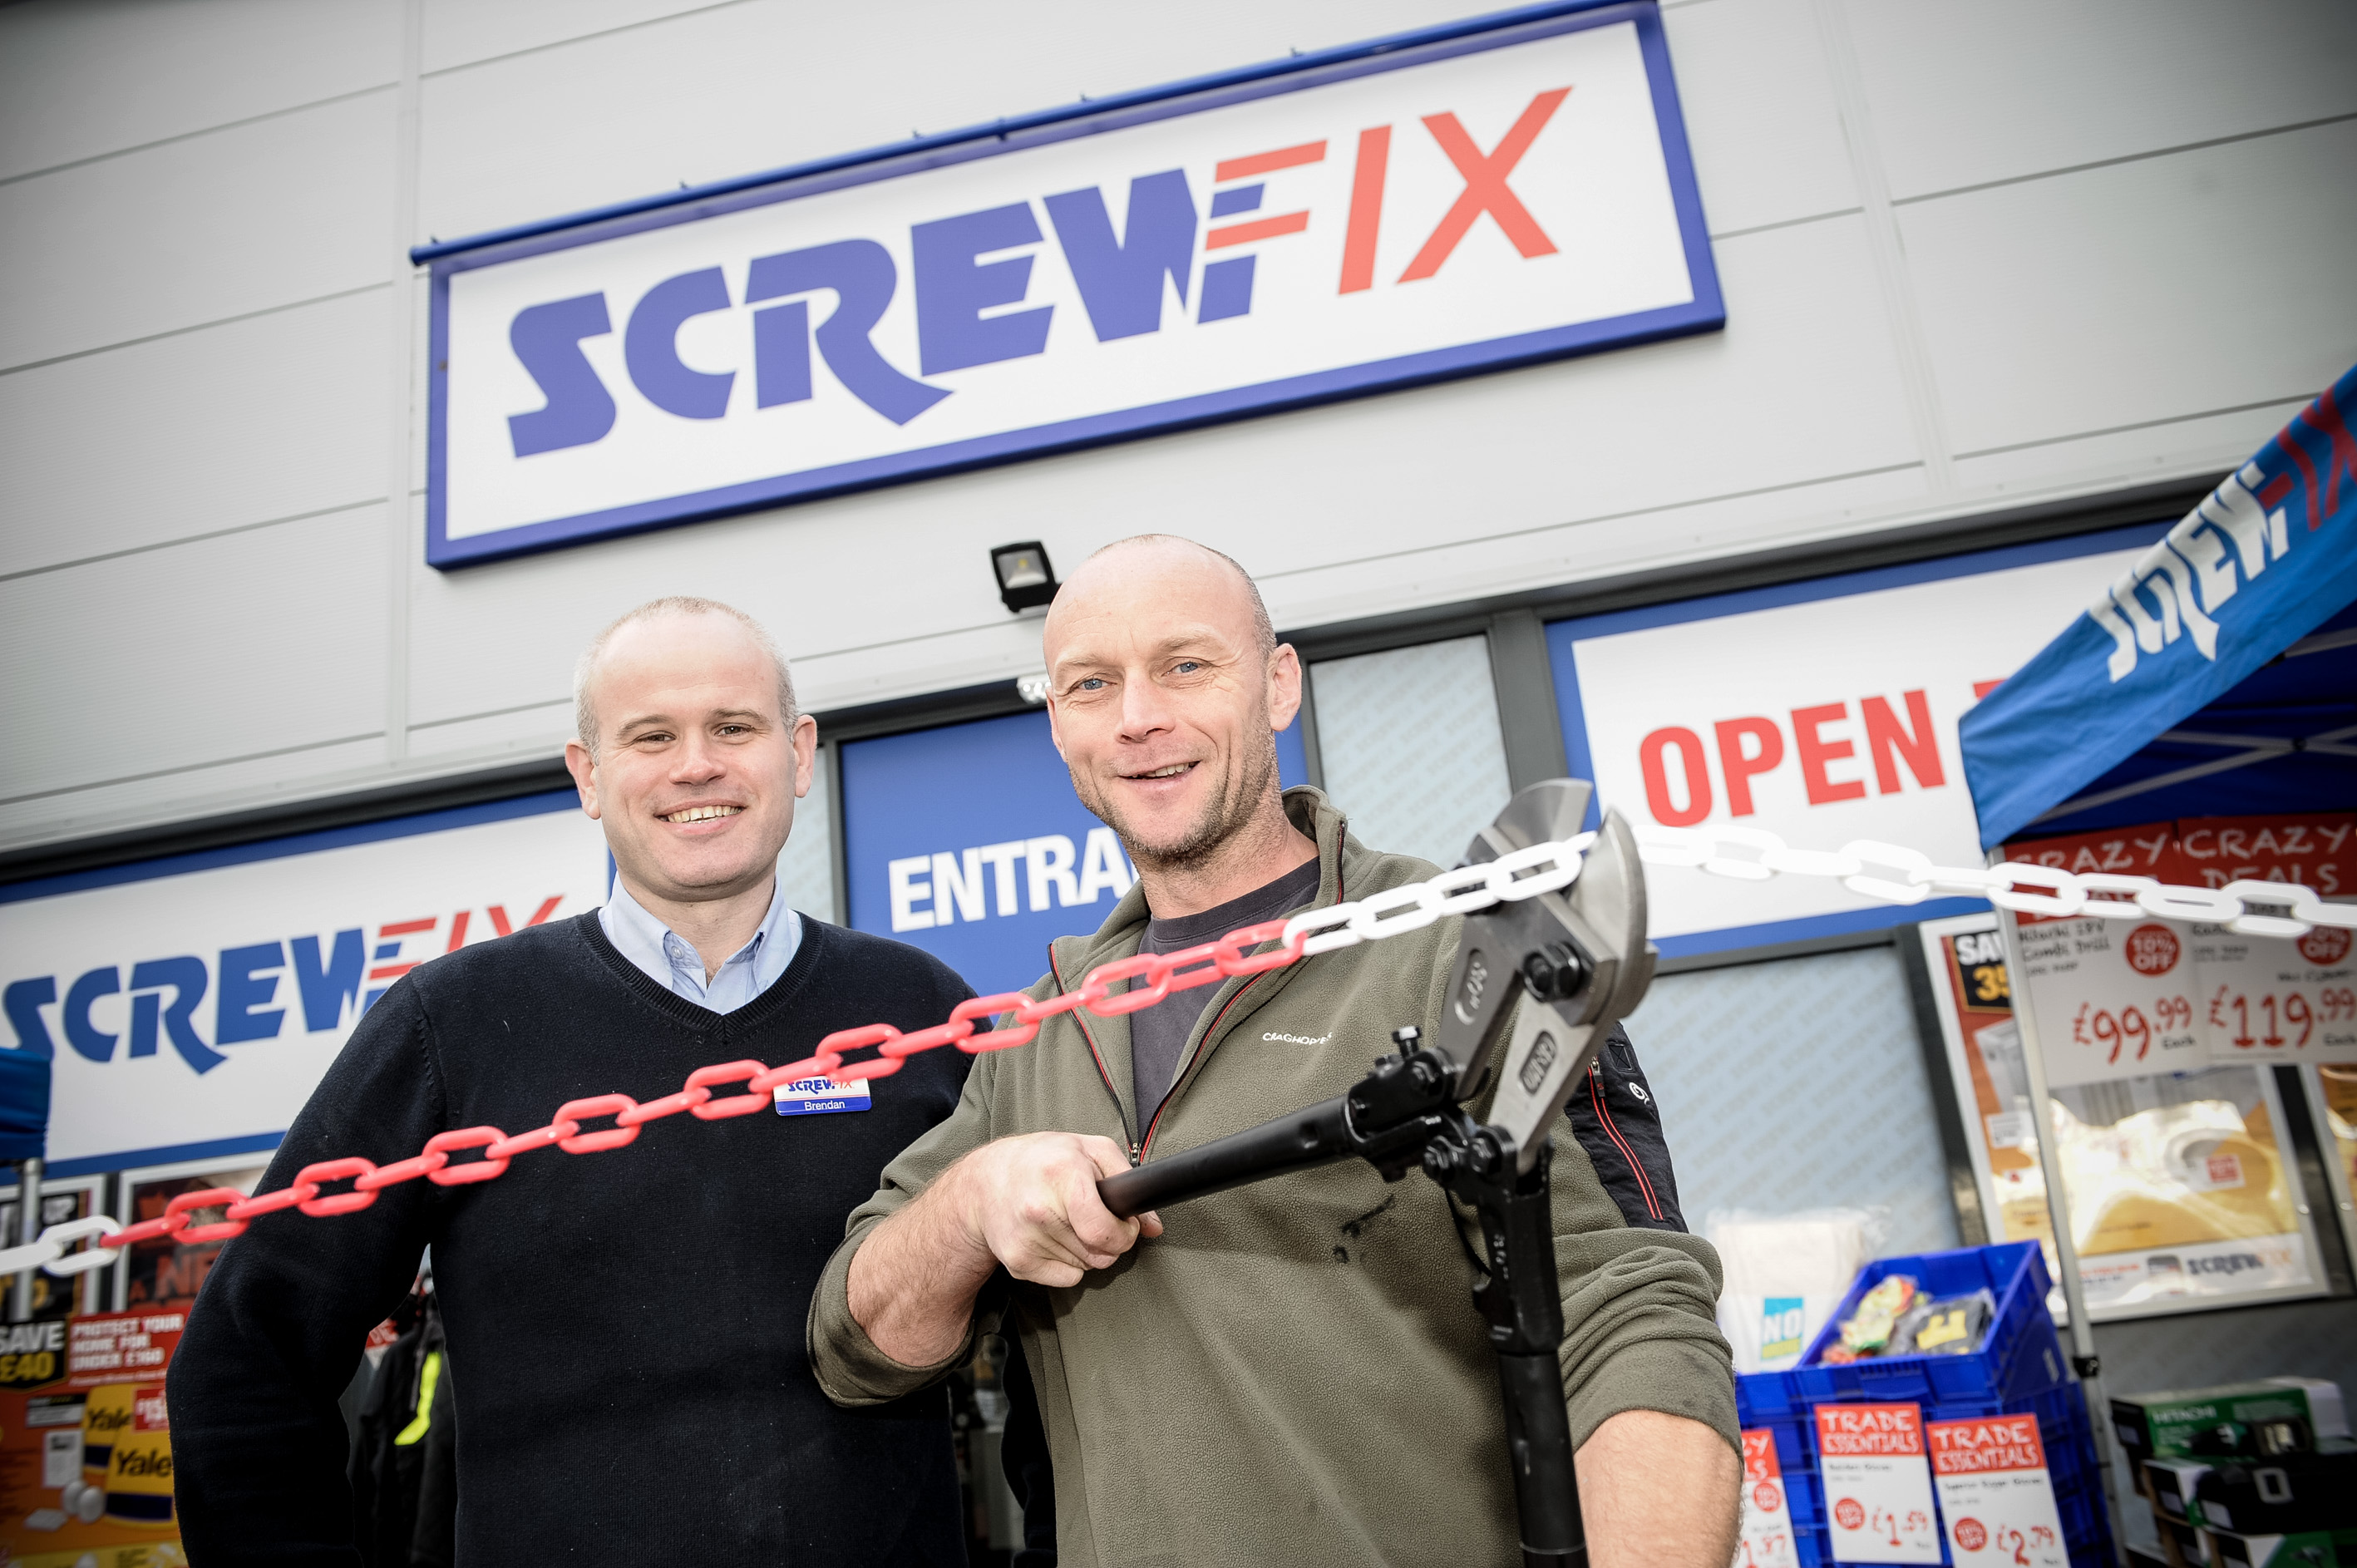 Bishop Auckland’s first Screwfix store is declared a runaway success